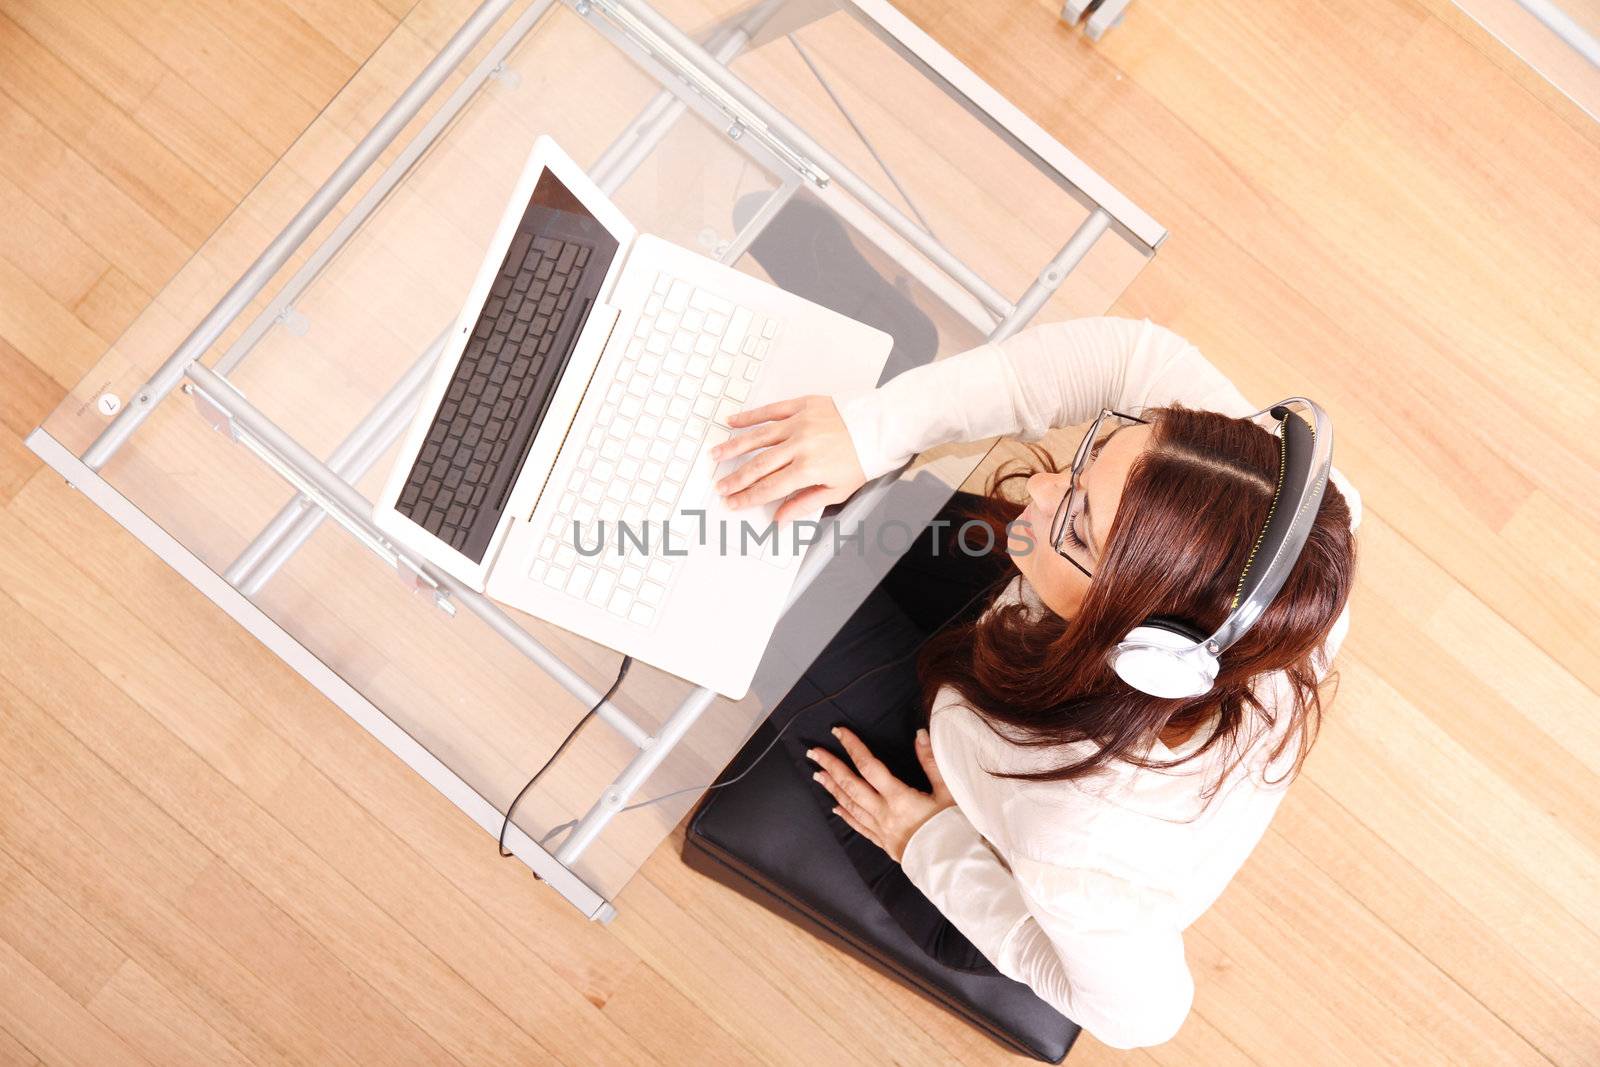 Business woman working on a Laptop while listening music with Headphones.